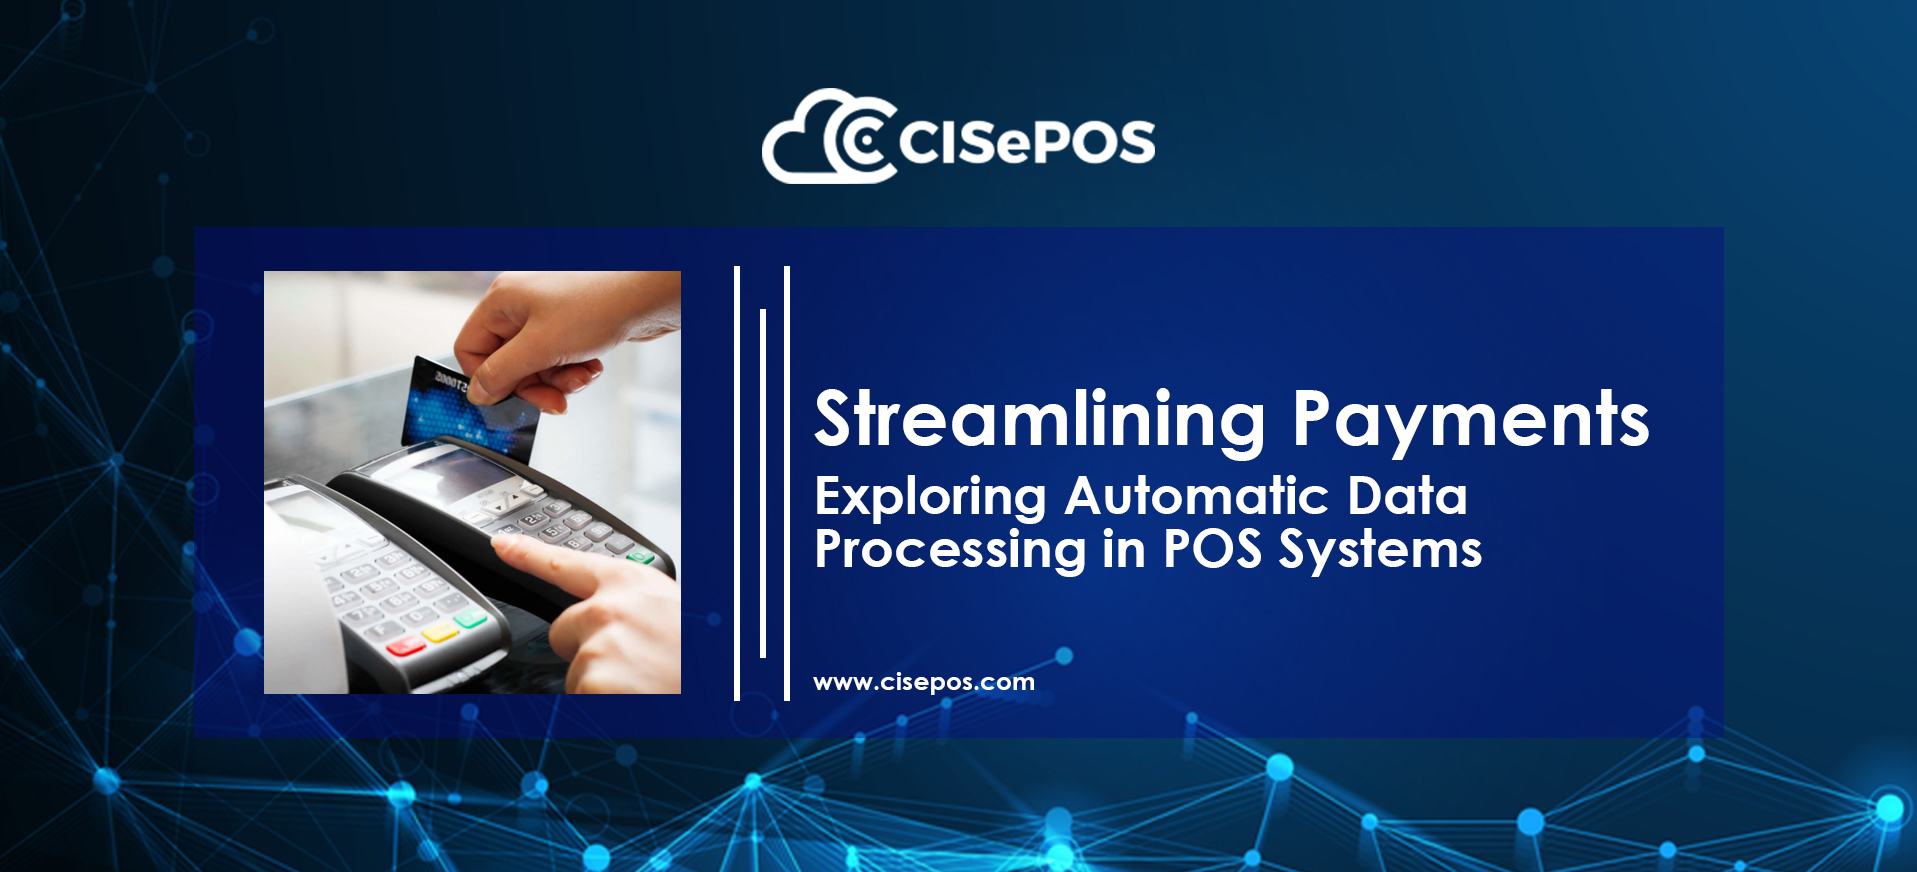 Streamlining Payments: Exploring Automatic Data Processing in POS Systems